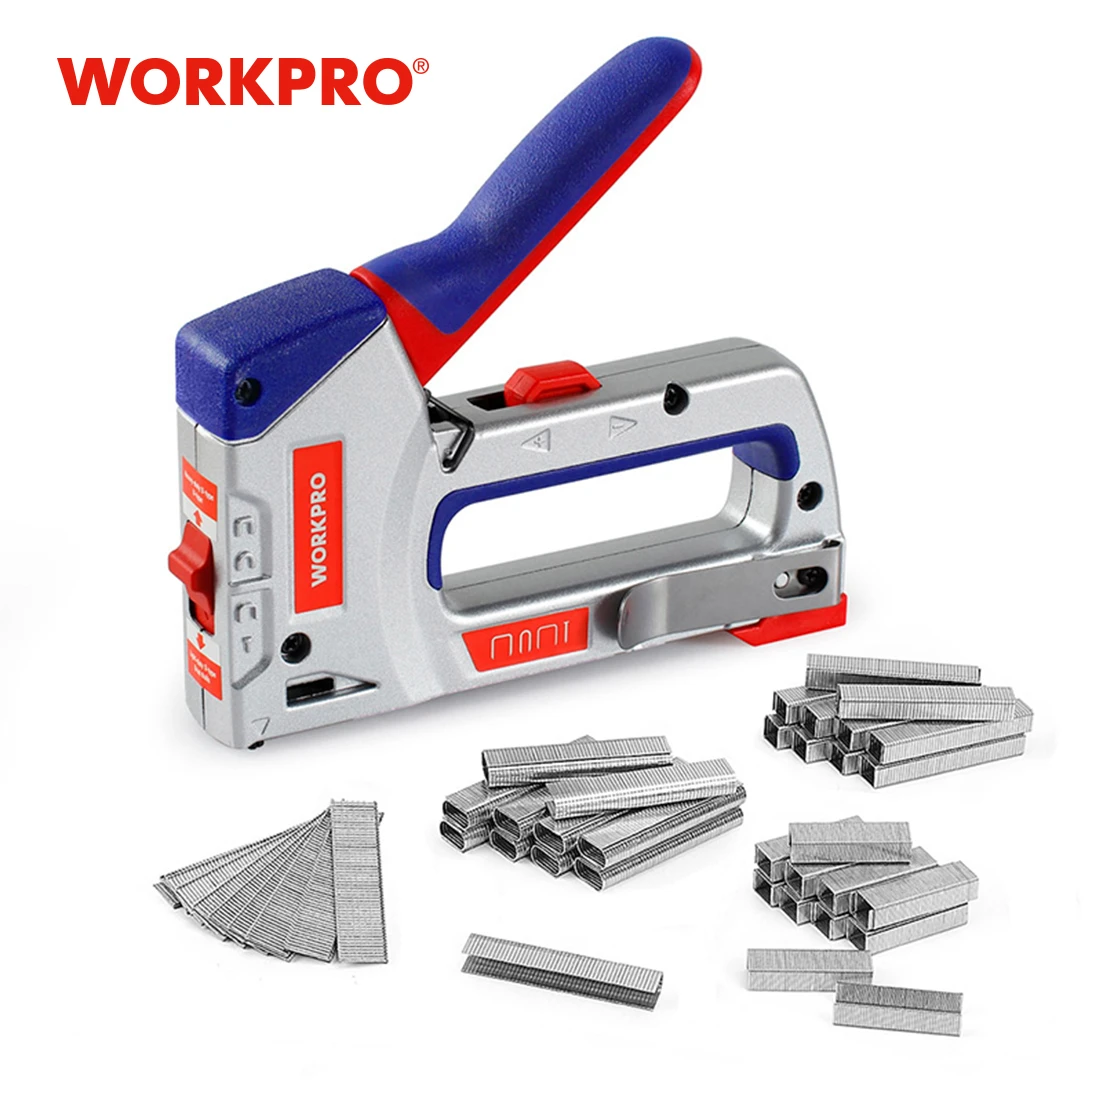 WORKPRO 3 IN 1 Heavy Duty Staple Gun for DIY Home Decoration Furniture Stapler Manual Nail Gun with 800 Staples Nailer